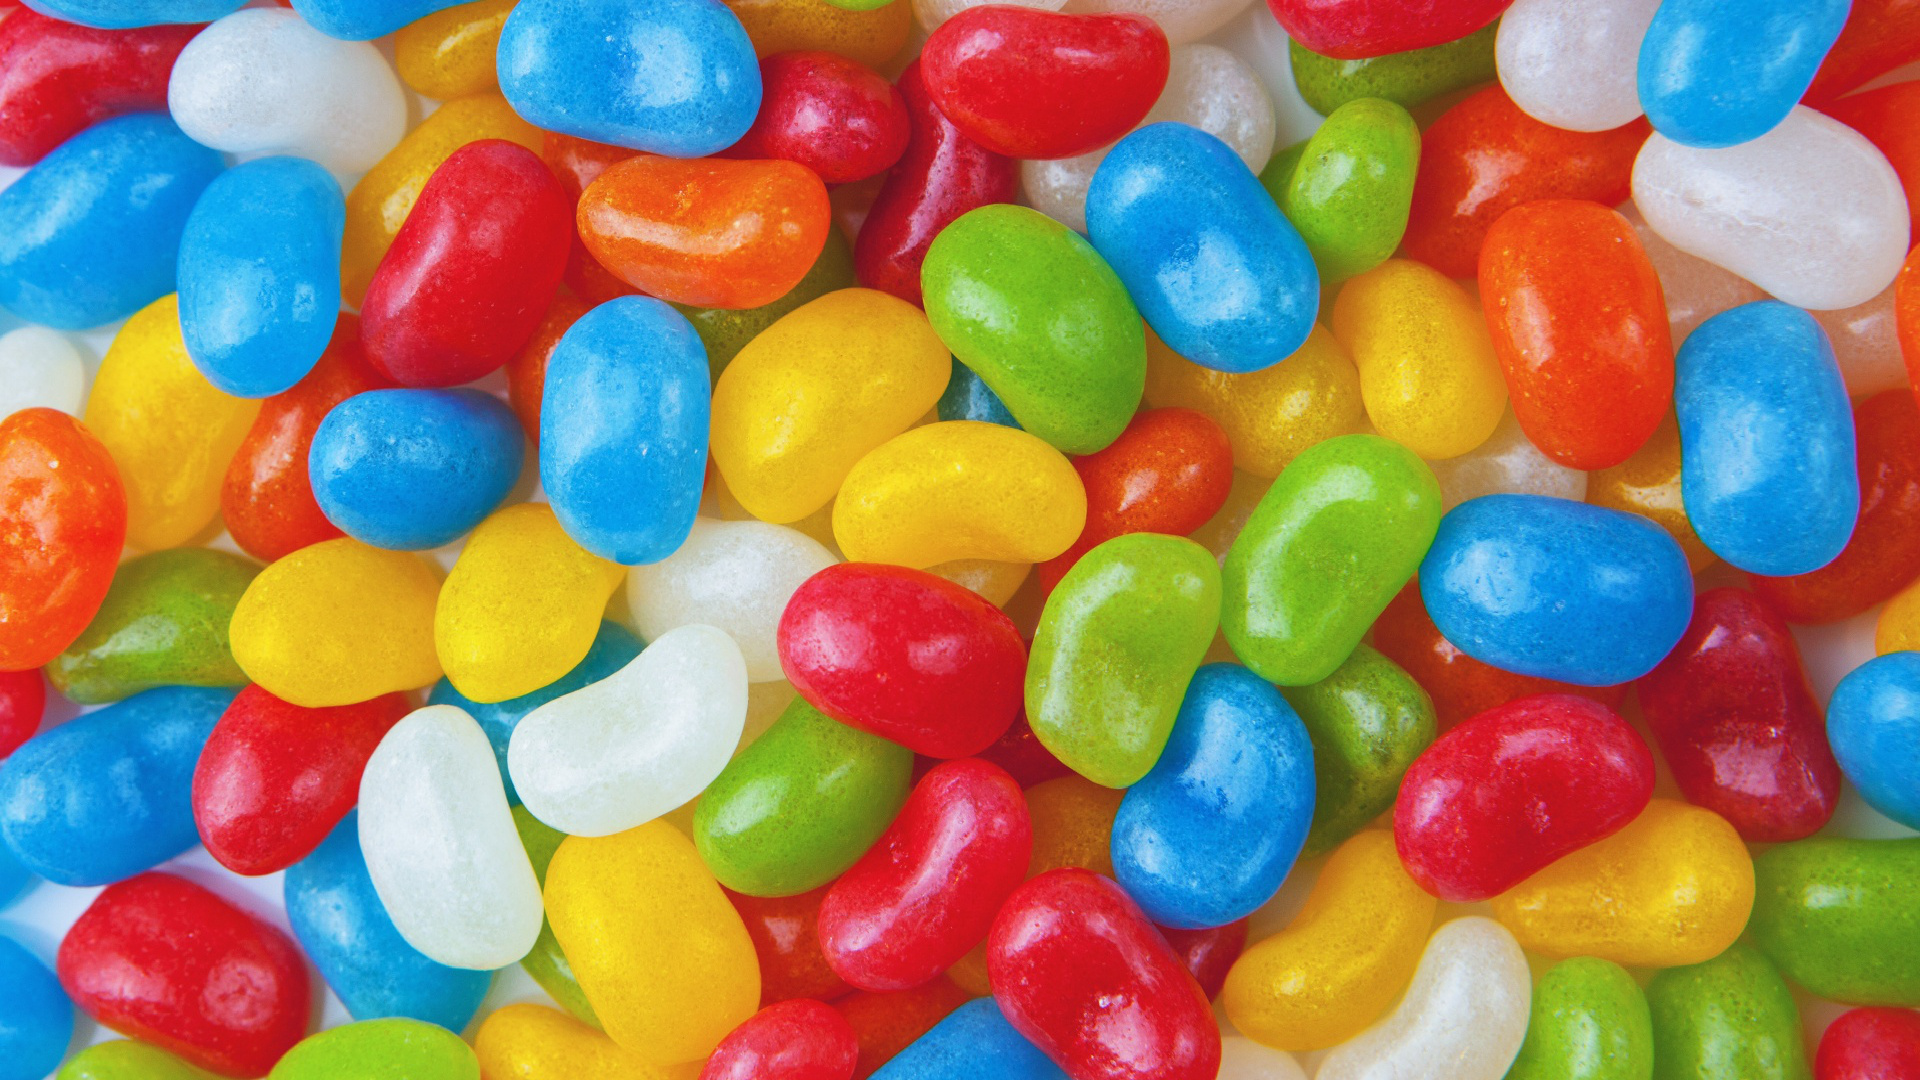 Jelly Beans, Colorful assortment, High-quality image, Fun and tasty, 1920x1080 Full HD Desktop